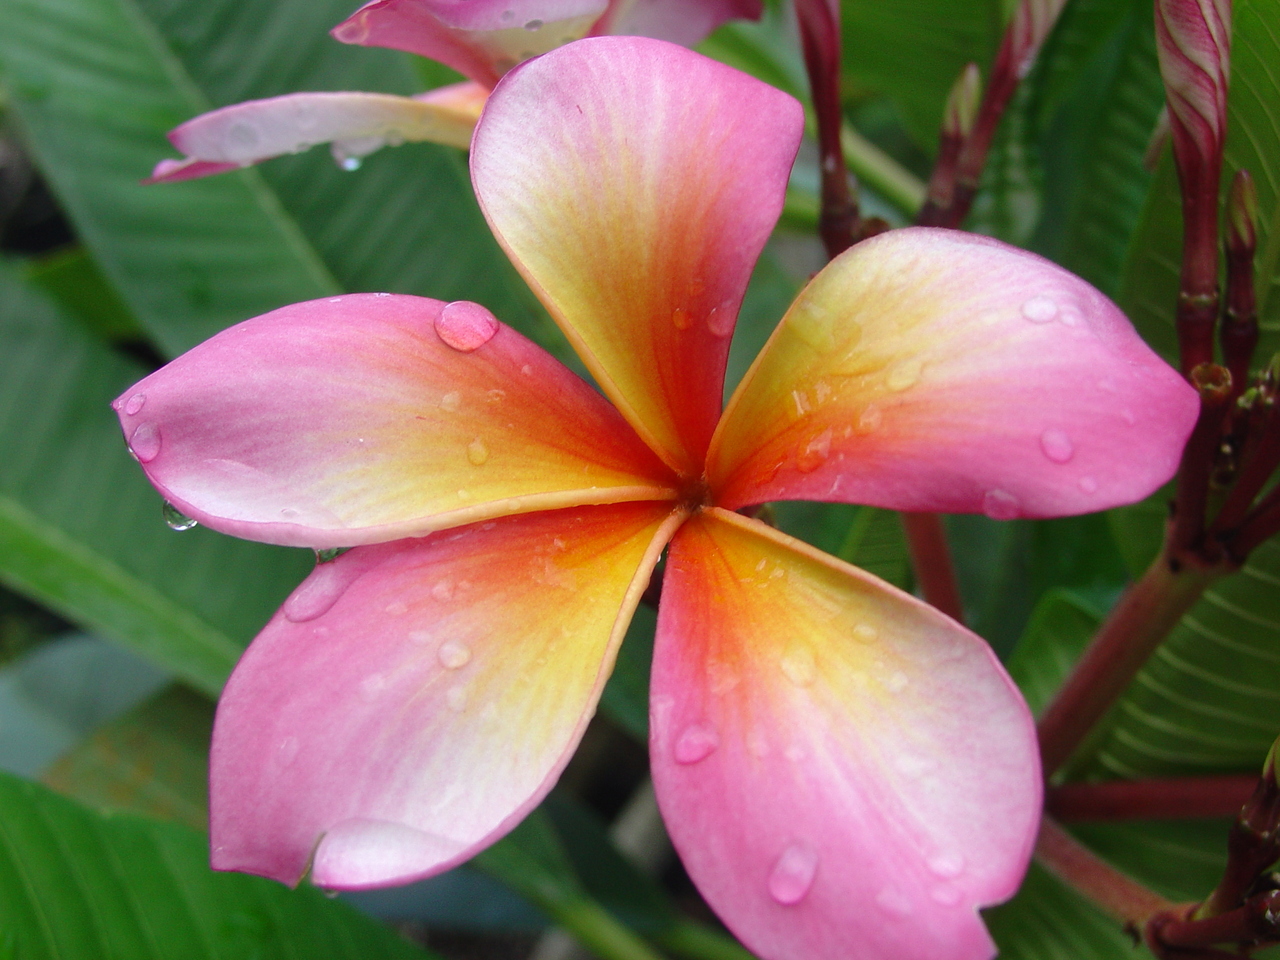 Wishy Washy (rooted) aka Cooktown Queen Plumeria Questions & Answers